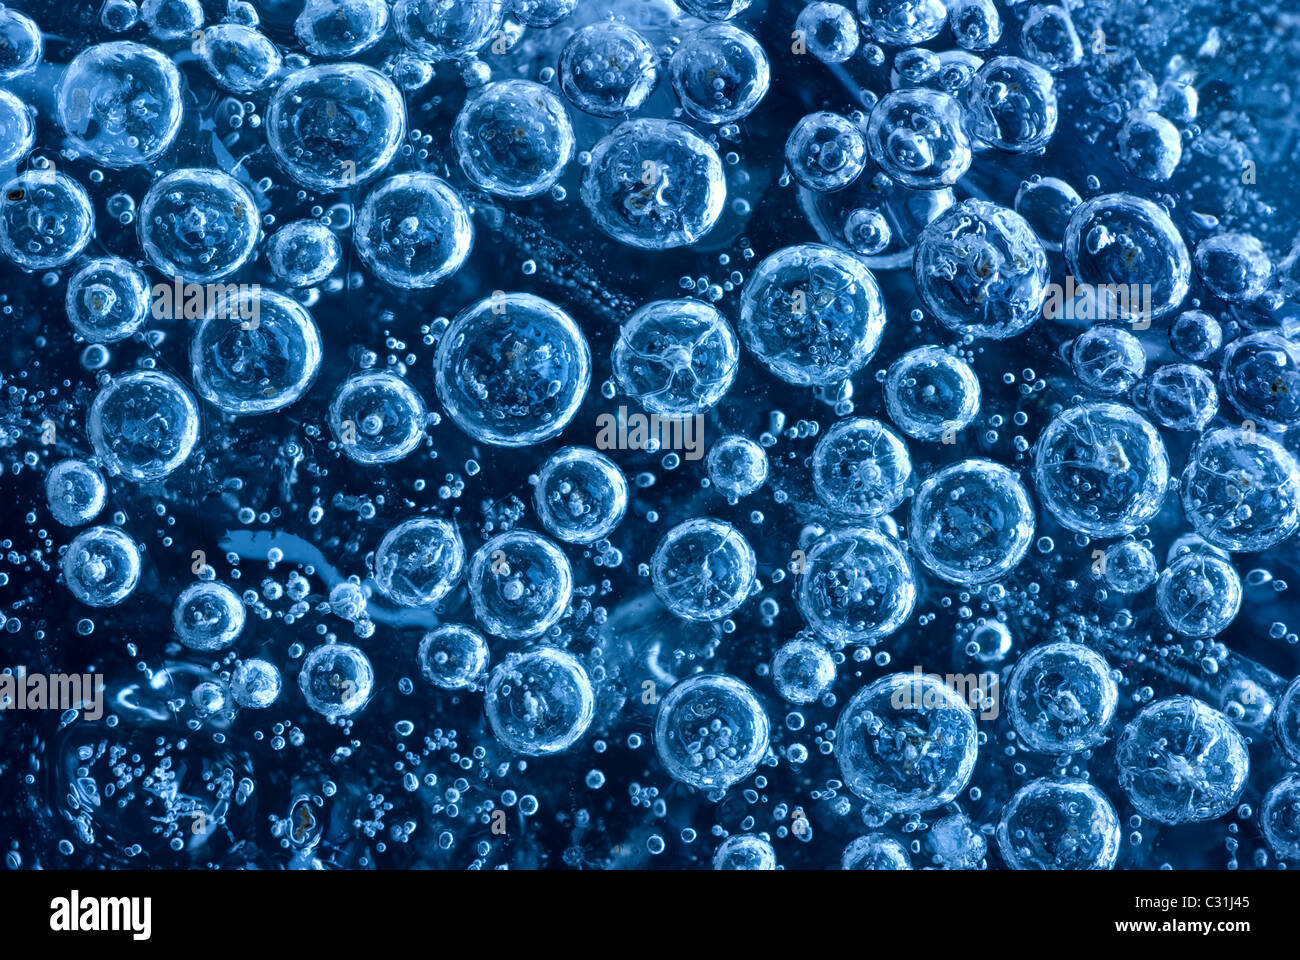 Bubbles trapped in ice, close-up Stock Photo